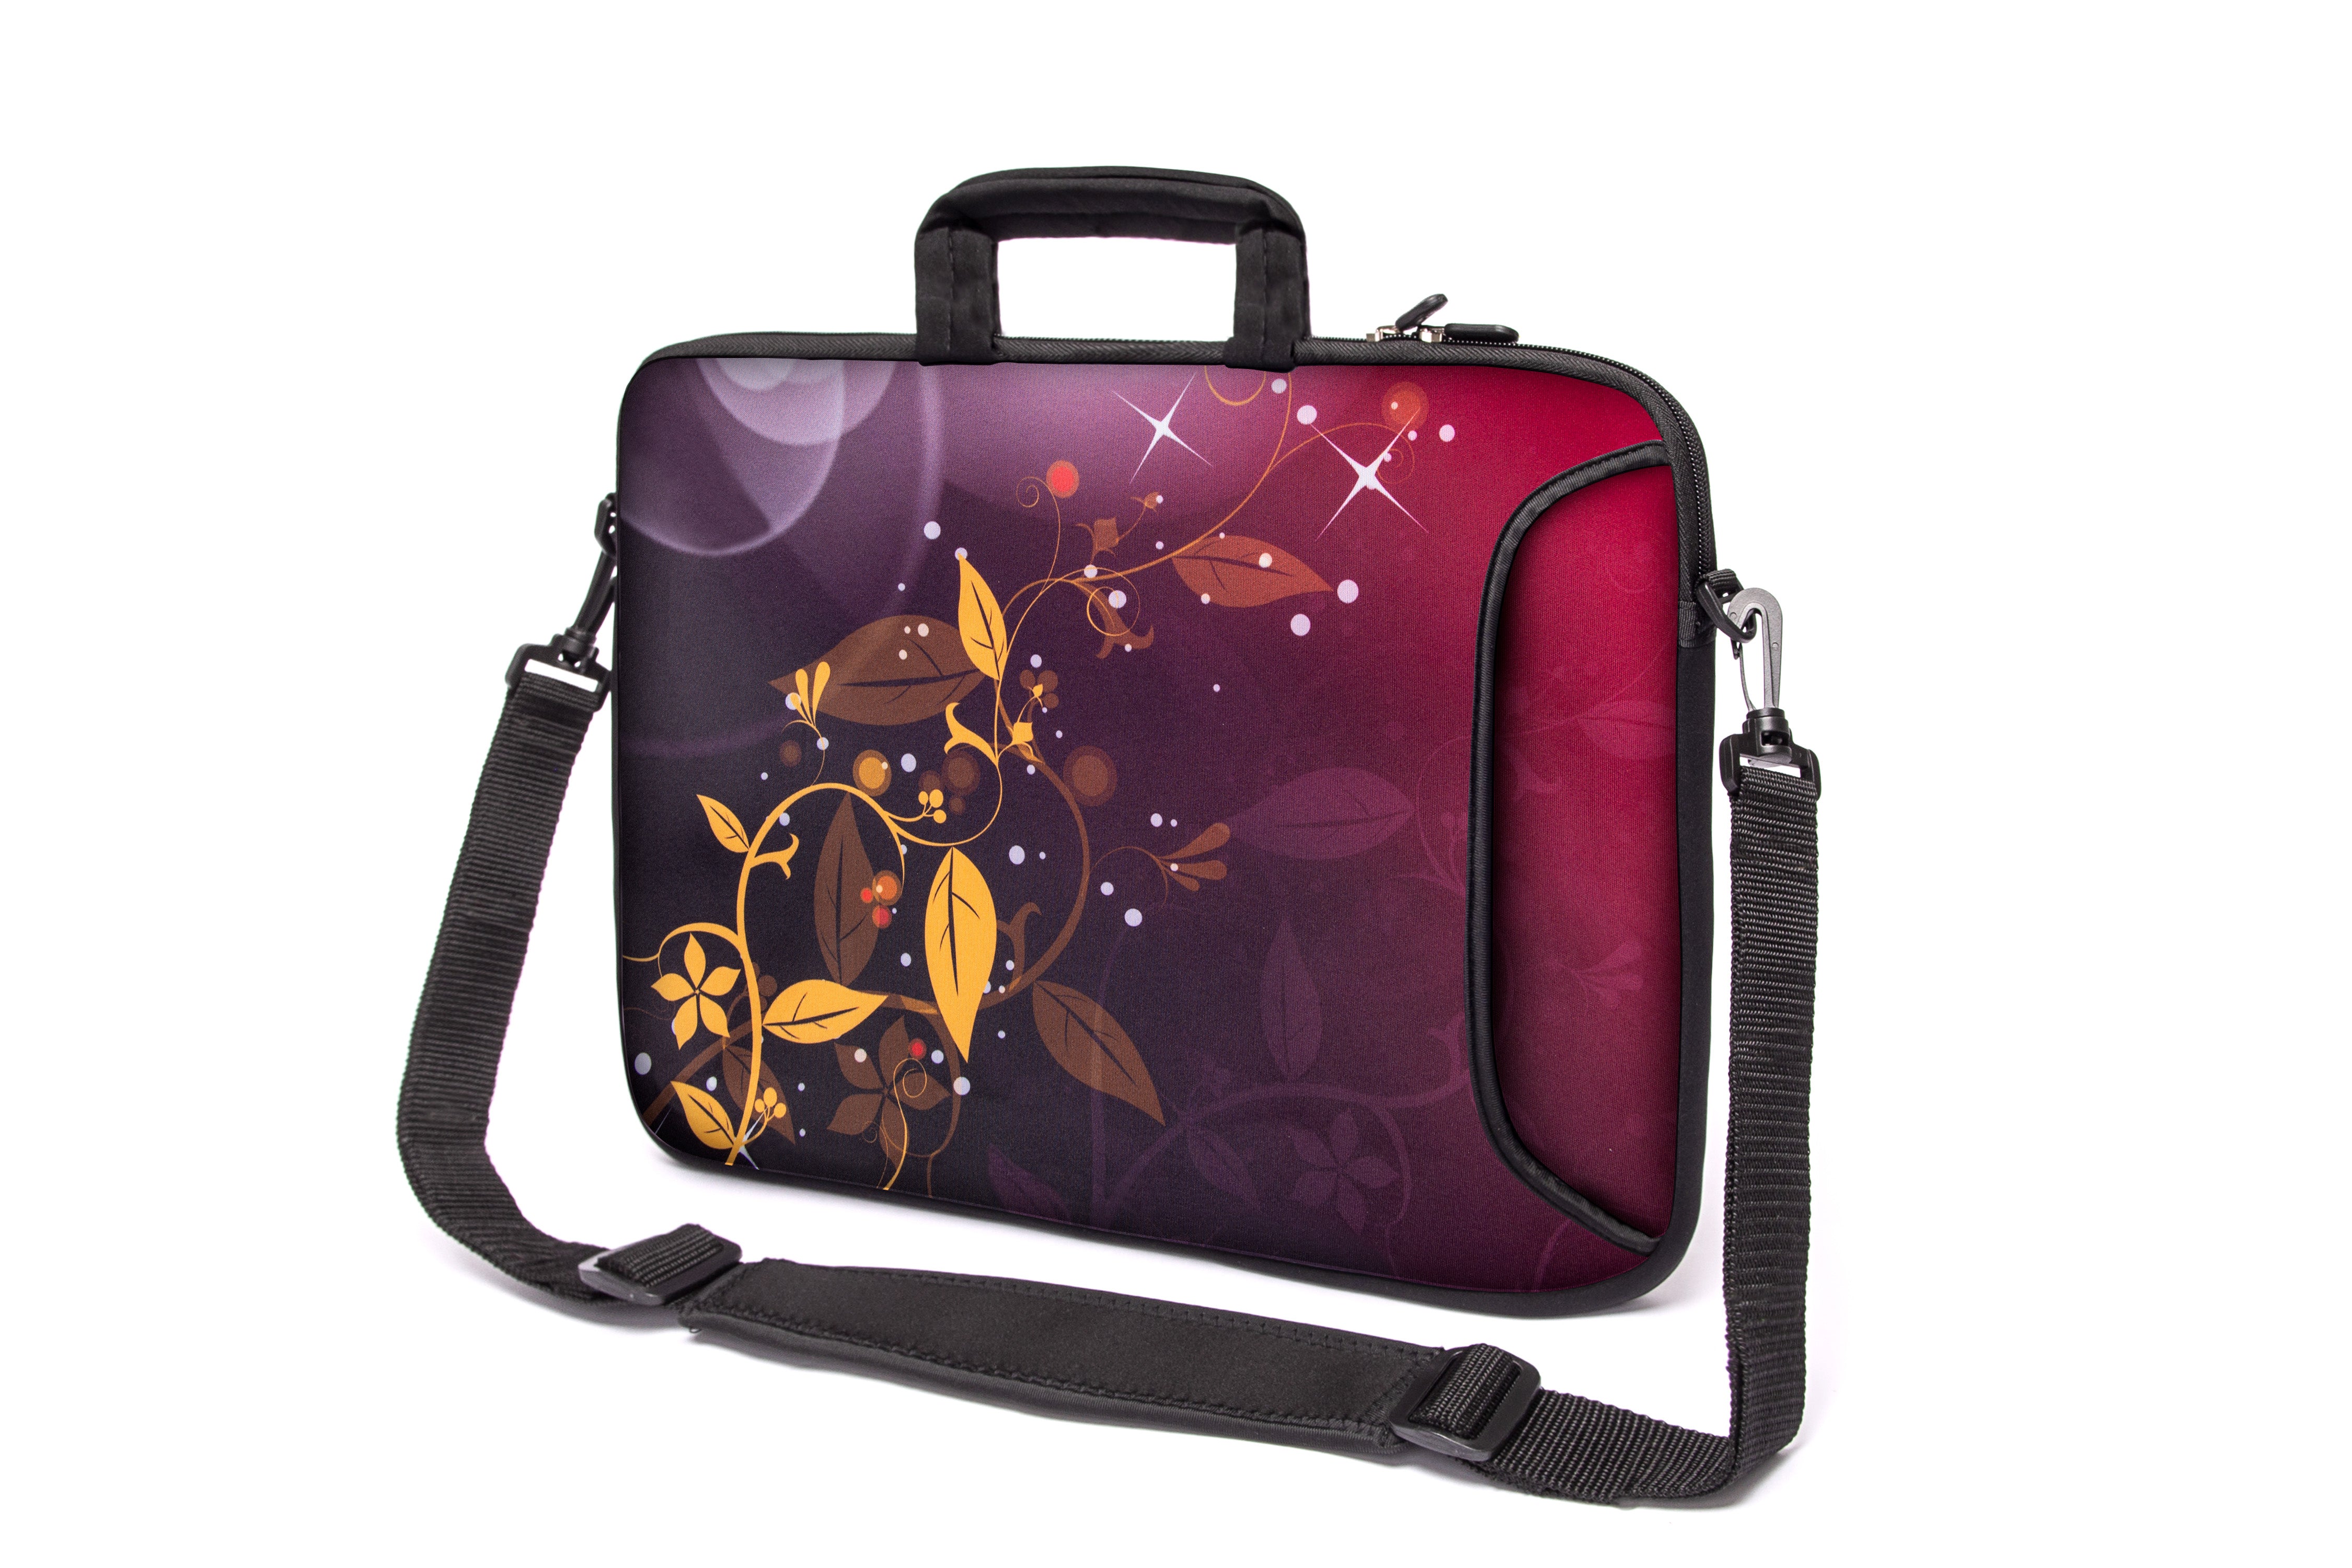 17"- 17.3" (inch) LAPTOP BAG/CASE WITH HANDLE & STRAP, NEOPRENE MADE FOR LAPTOPS/NOTEBOOKS, ZIPPED*BROWNYELLOWFLOWER